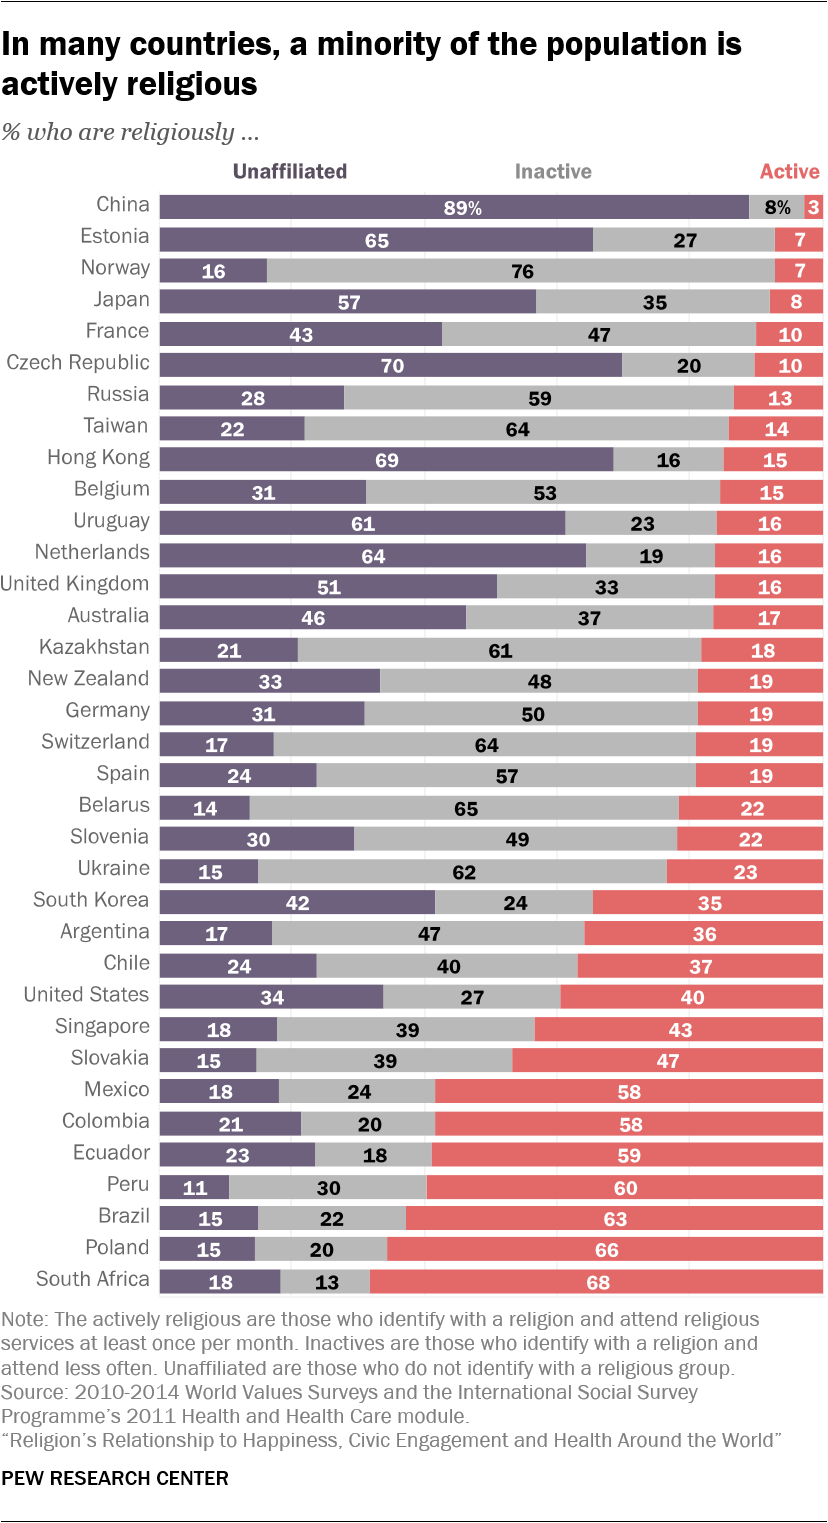 In many countries, a minority of the population is actively religious